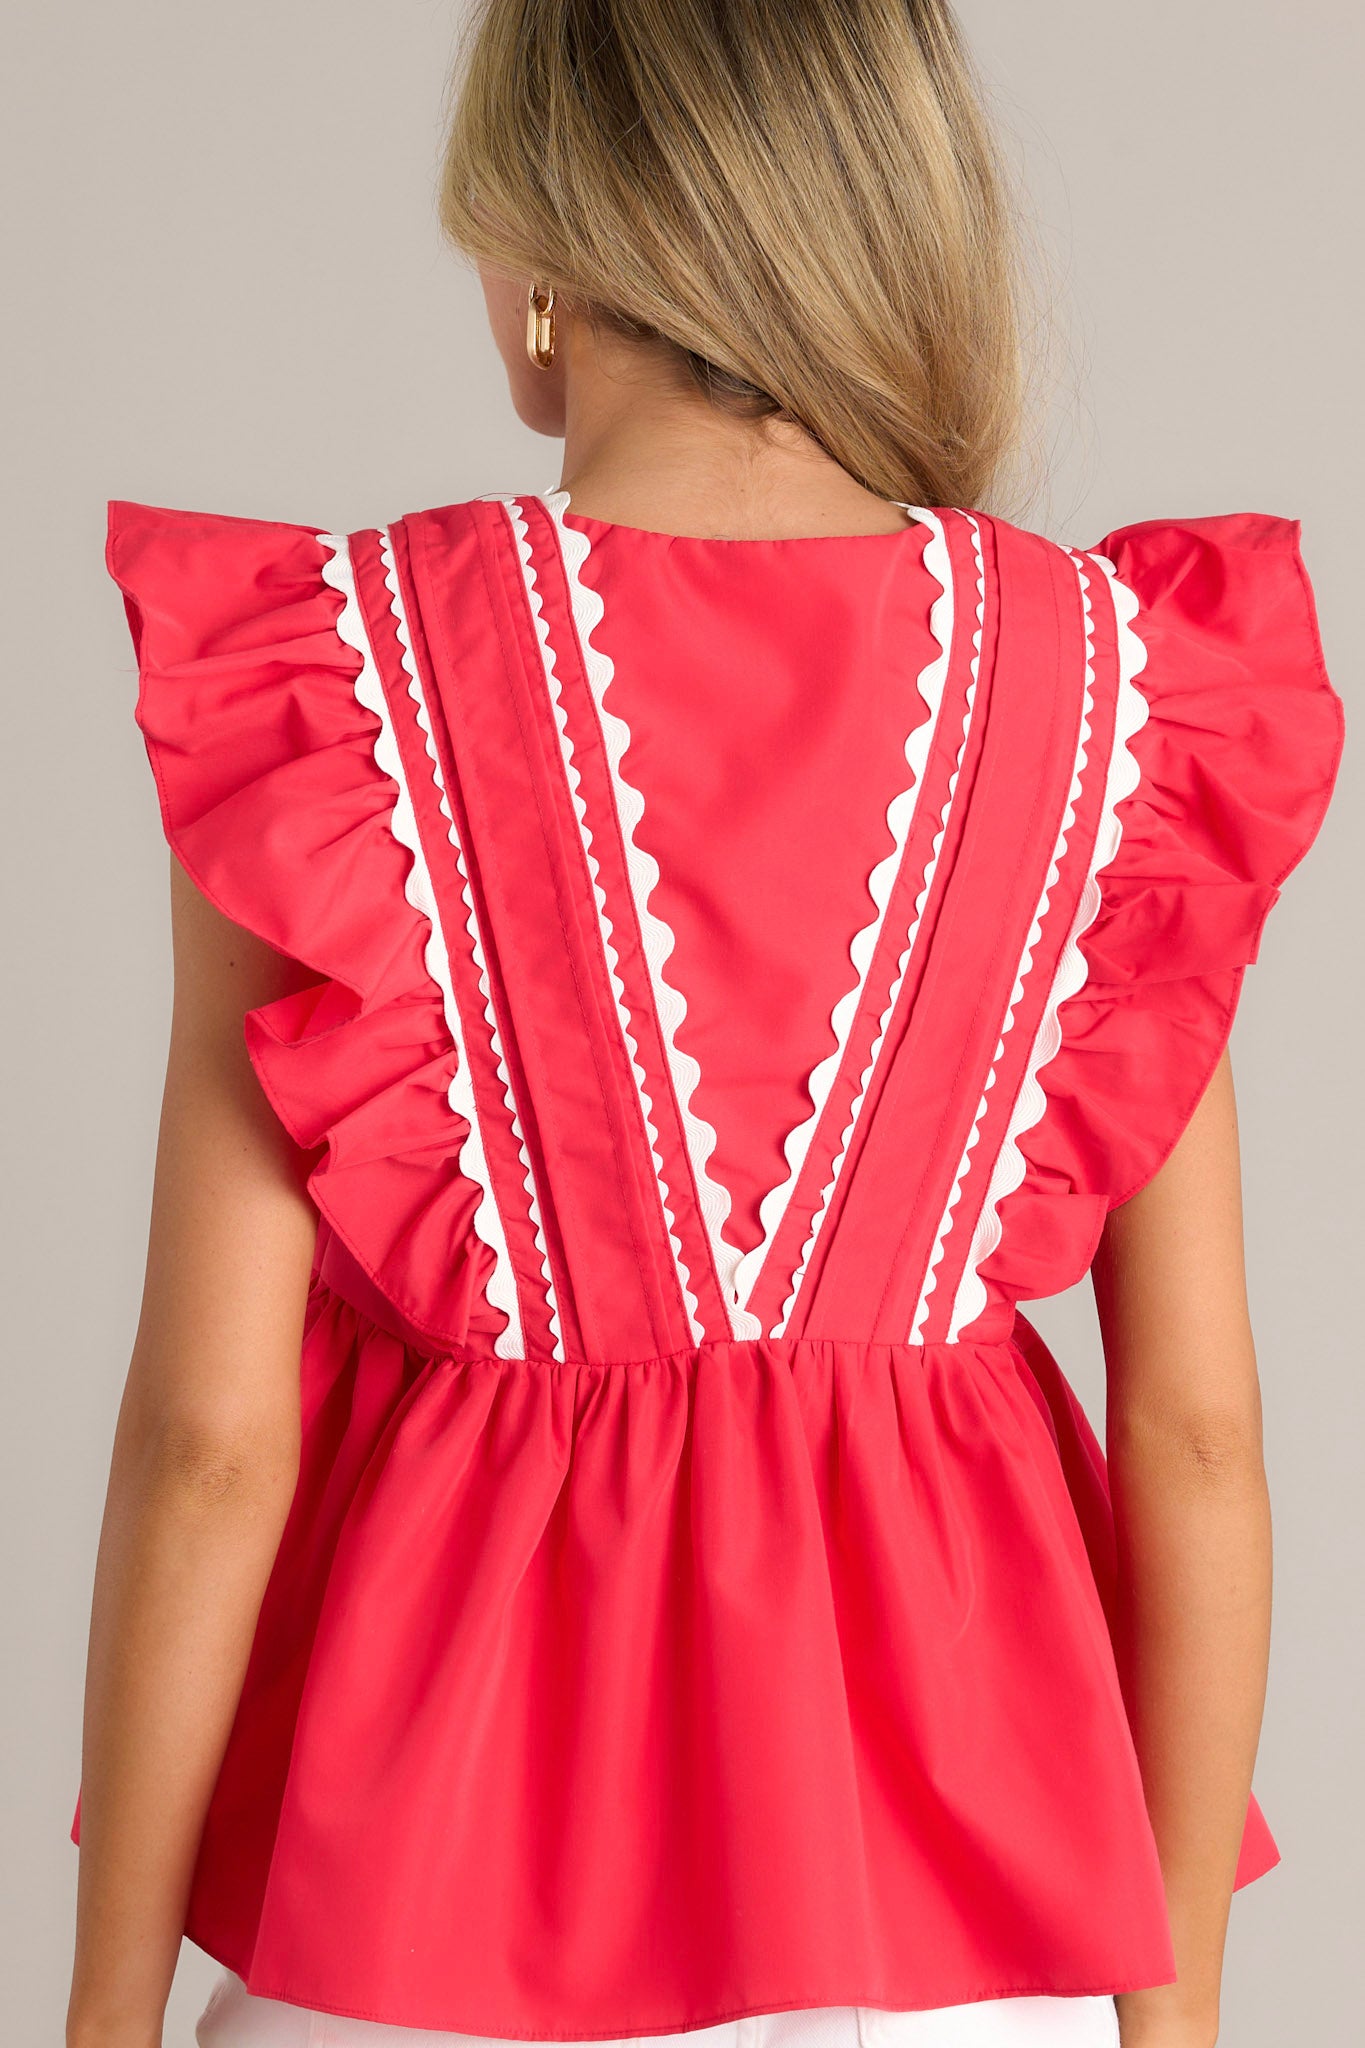 Back view of a red babydoll top highlighting the overall fit and flutter sleeves.